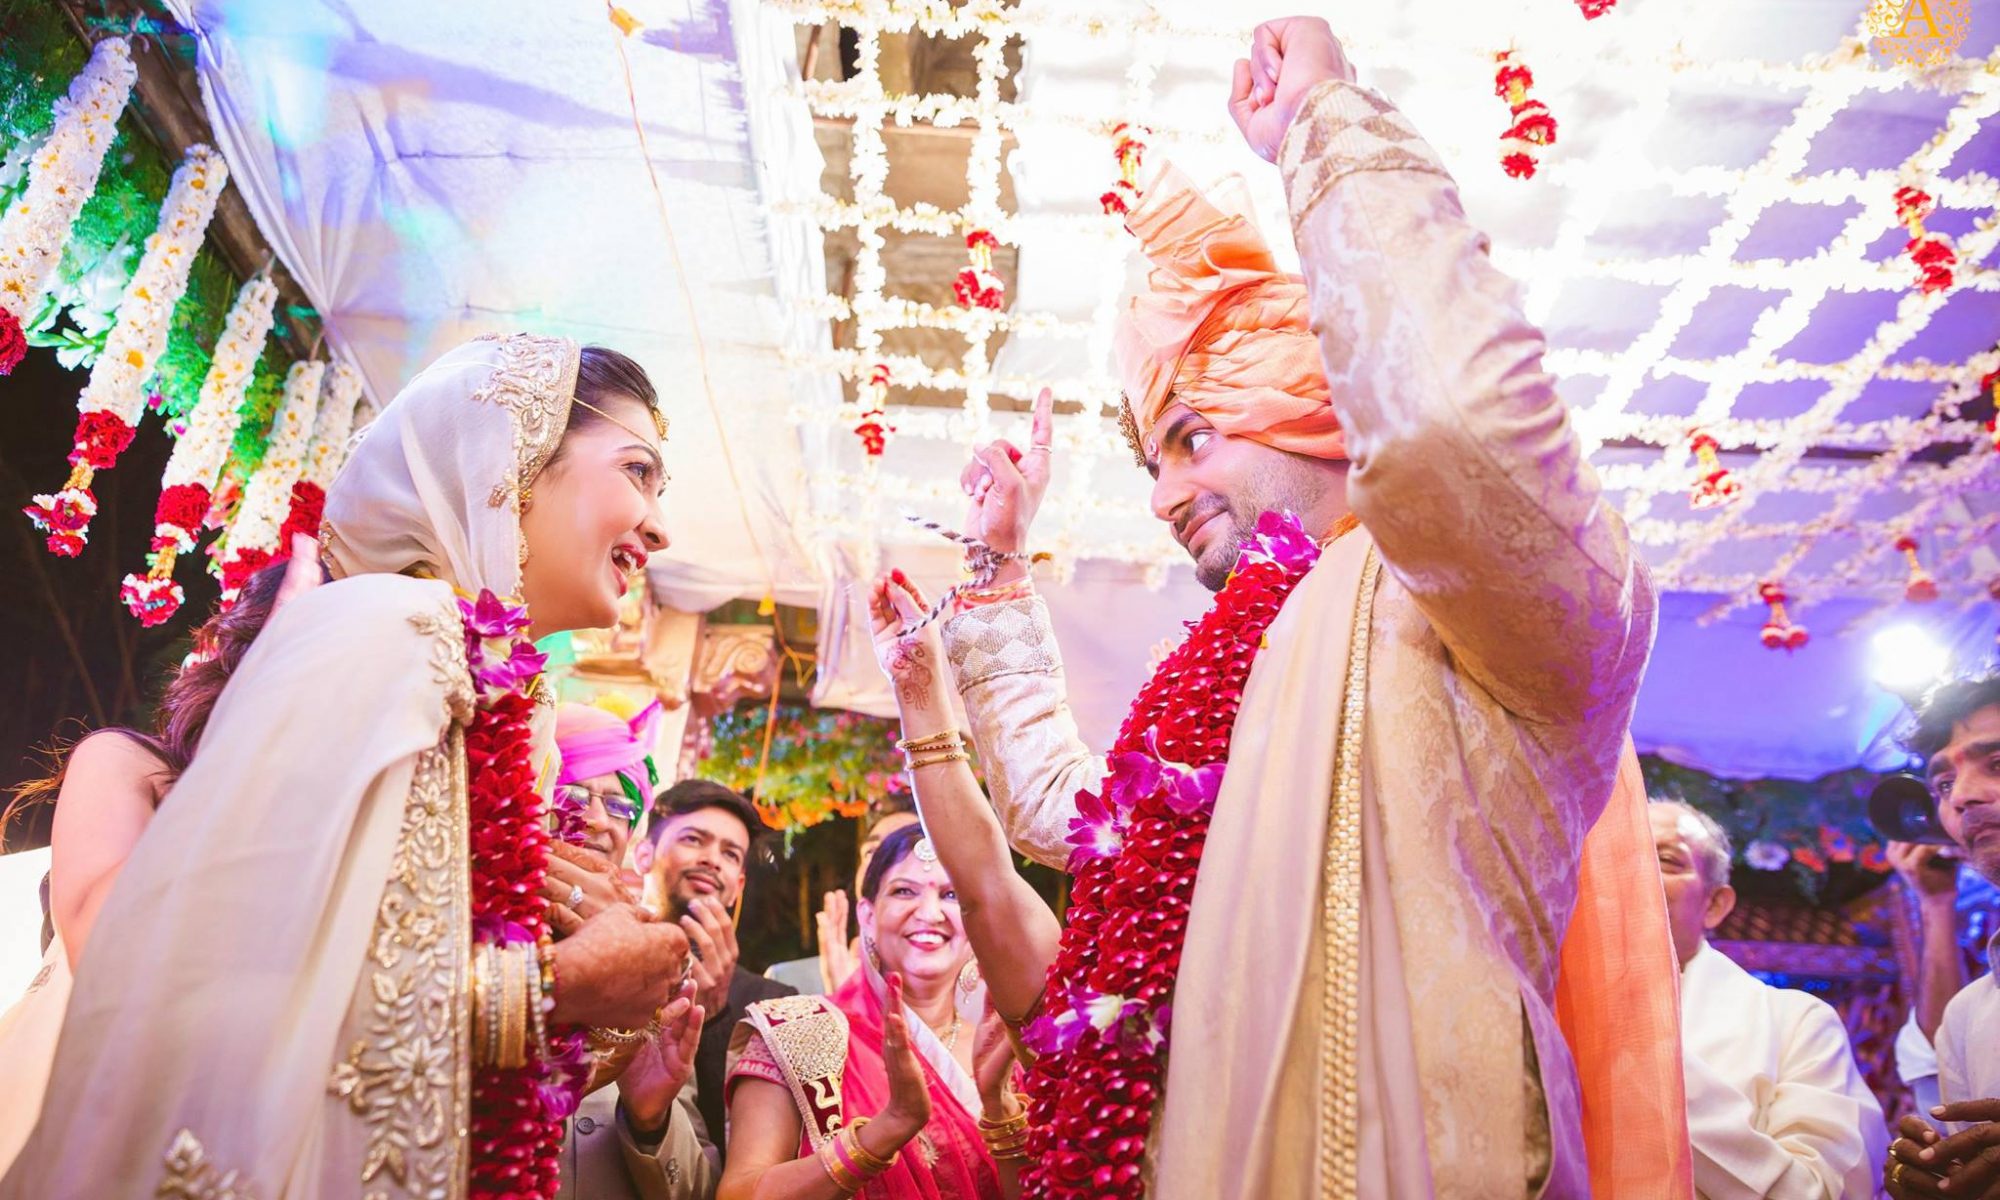 Some Of The Pre-Wedding Rituals That Are Done In Sikh Wedding